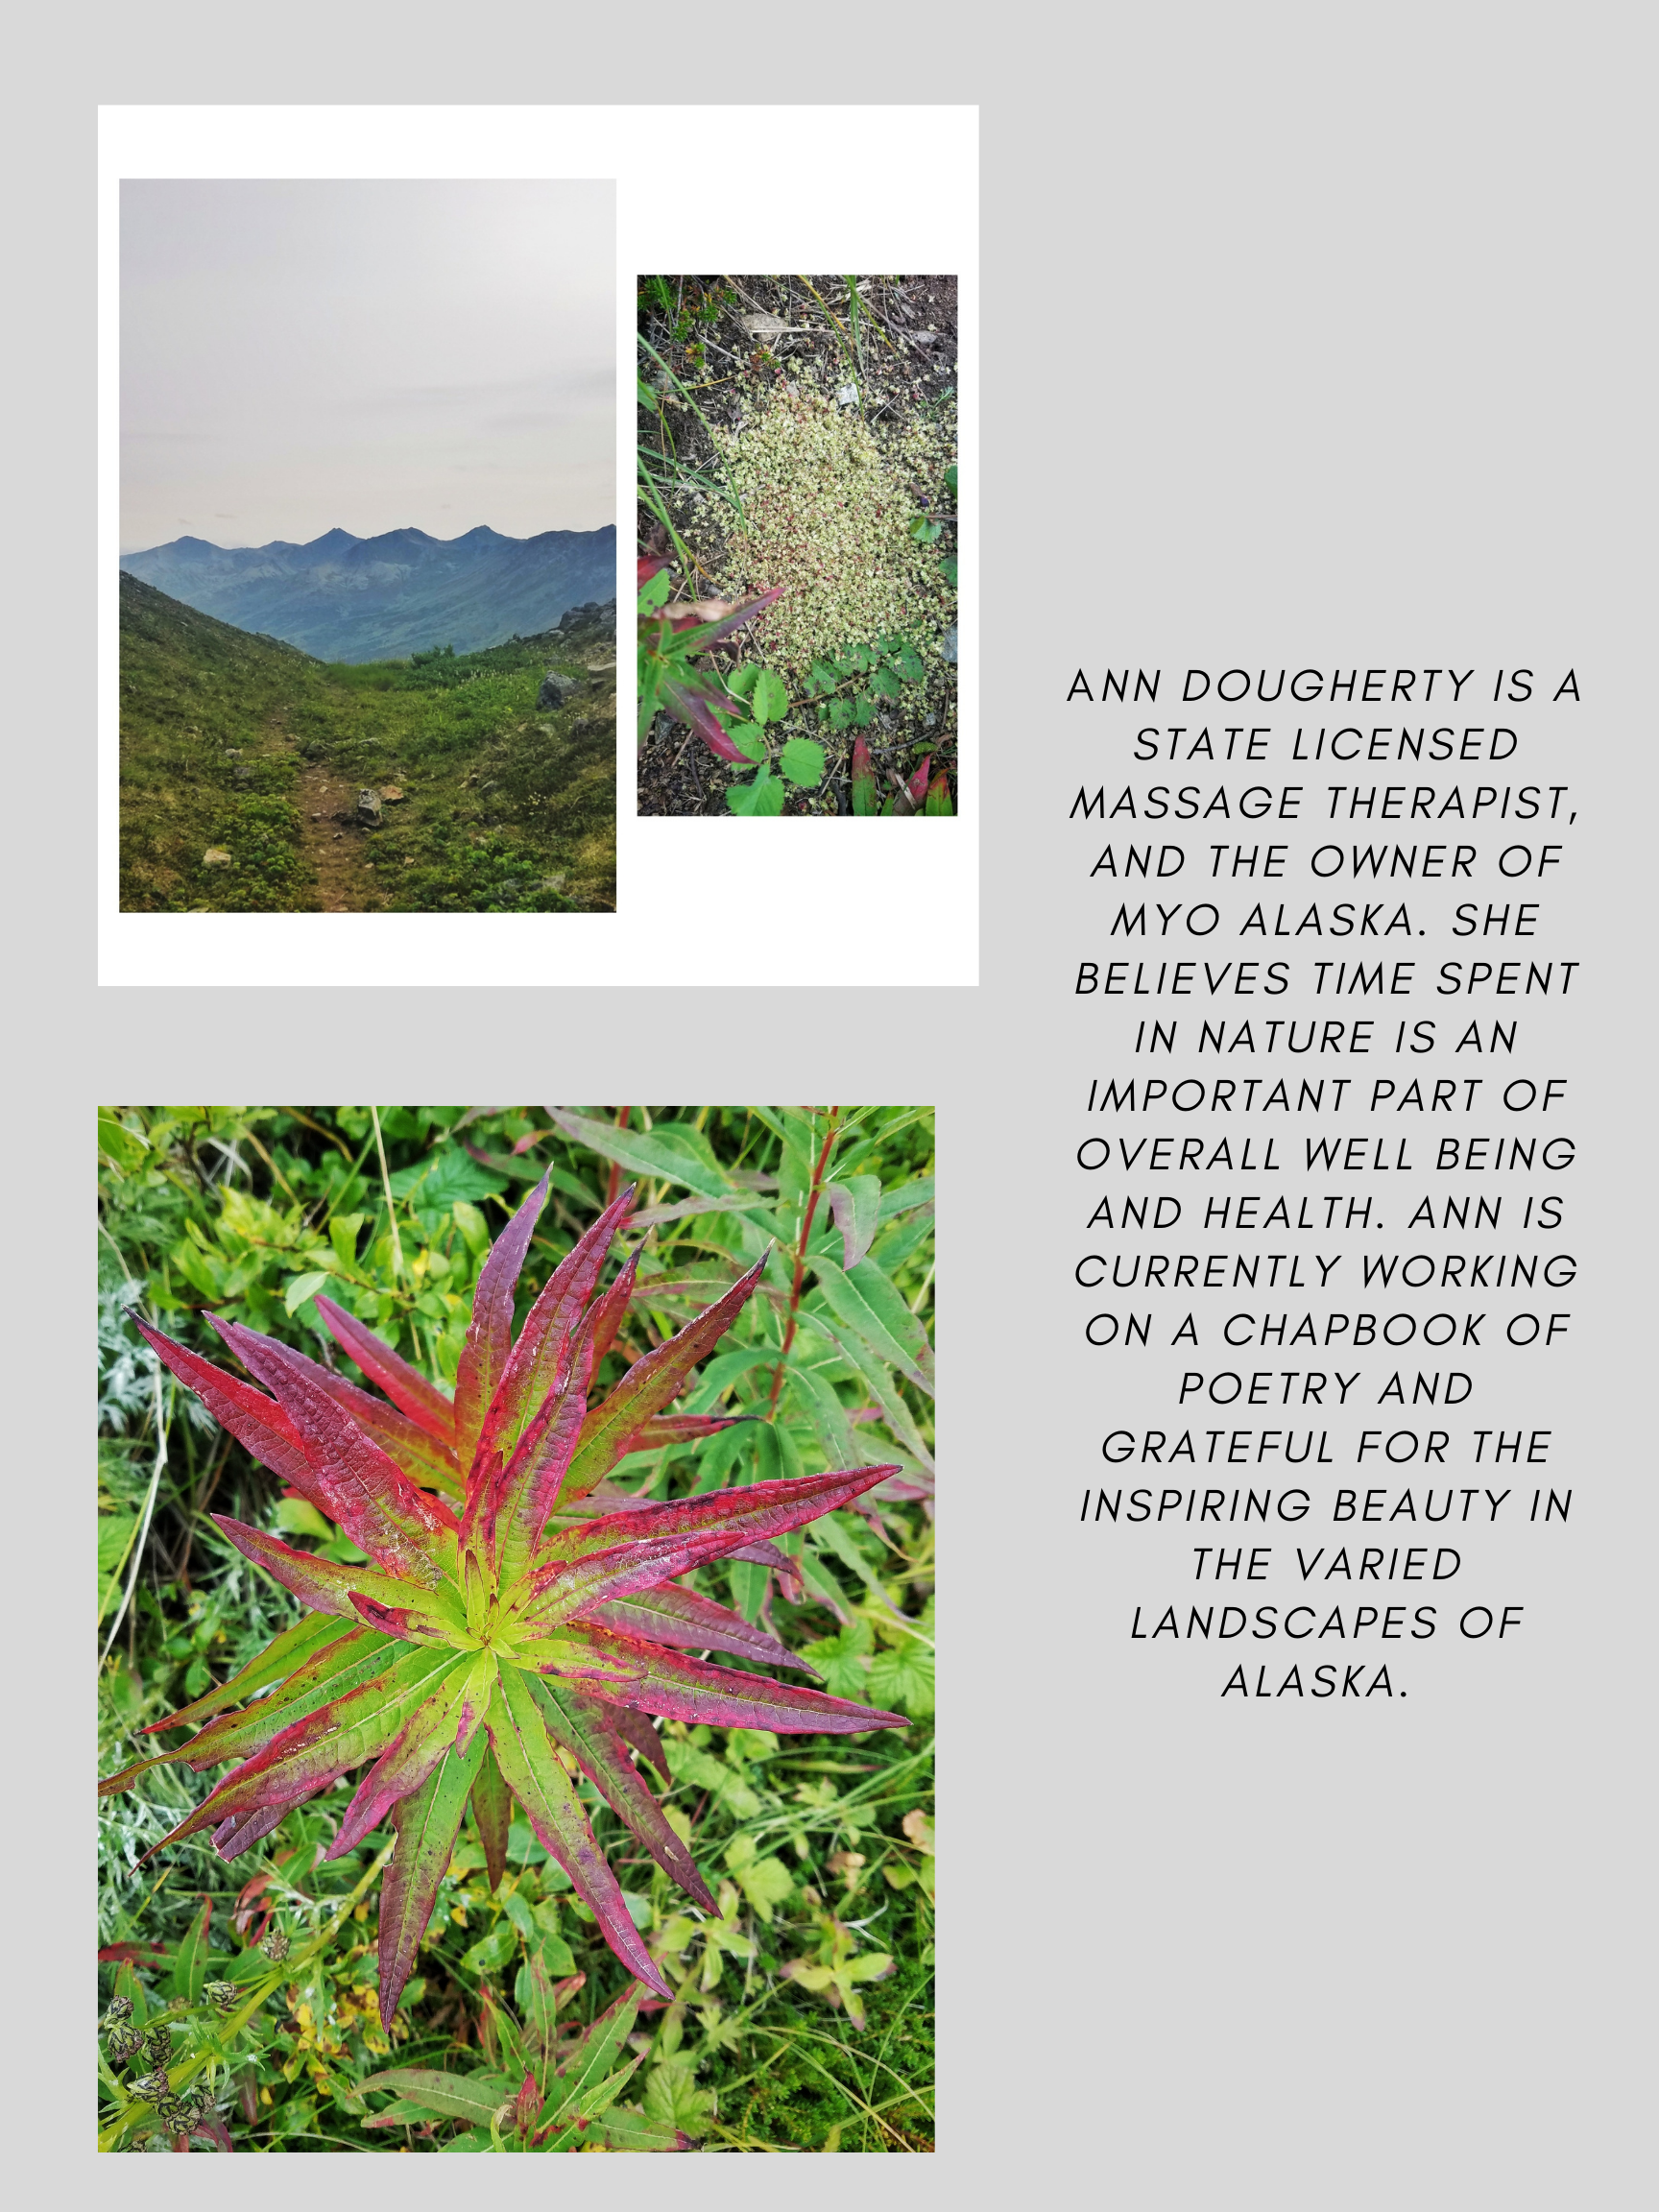 Ann Dougherty is a state licensed massage therapist, and the owner of Myo Alaska. She believes time spent in Nature is an important part of overall well being and health. Ann is currently working on a chapbook of poetry and grateful for the inspiring beauty in the varied landscapes of Alaska.